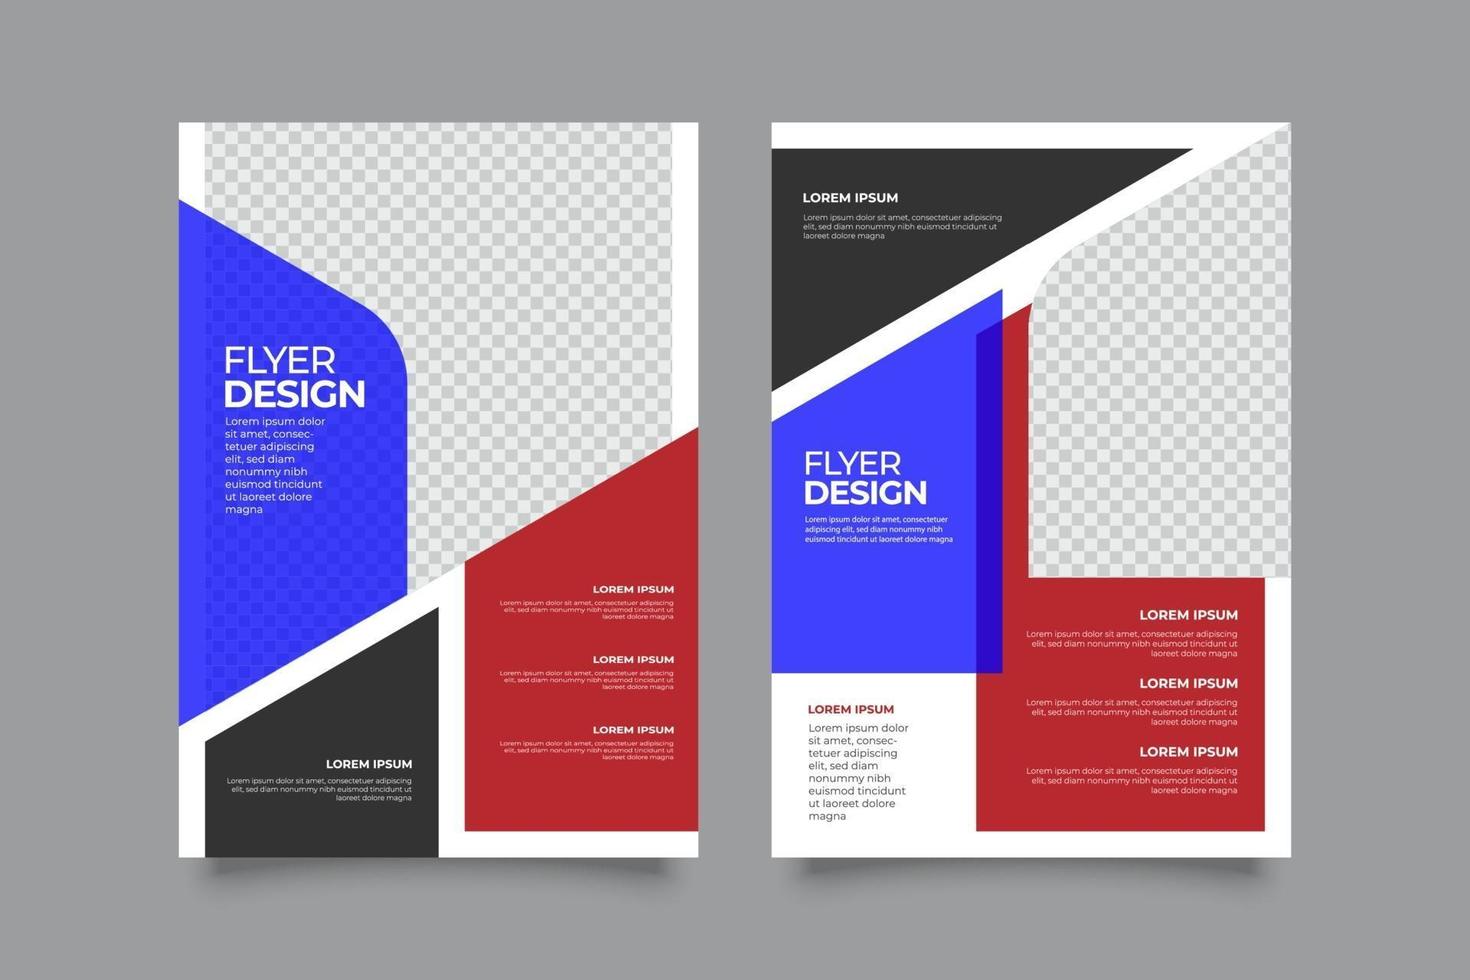 Flat Webinar flyer template with geometric shapes vector